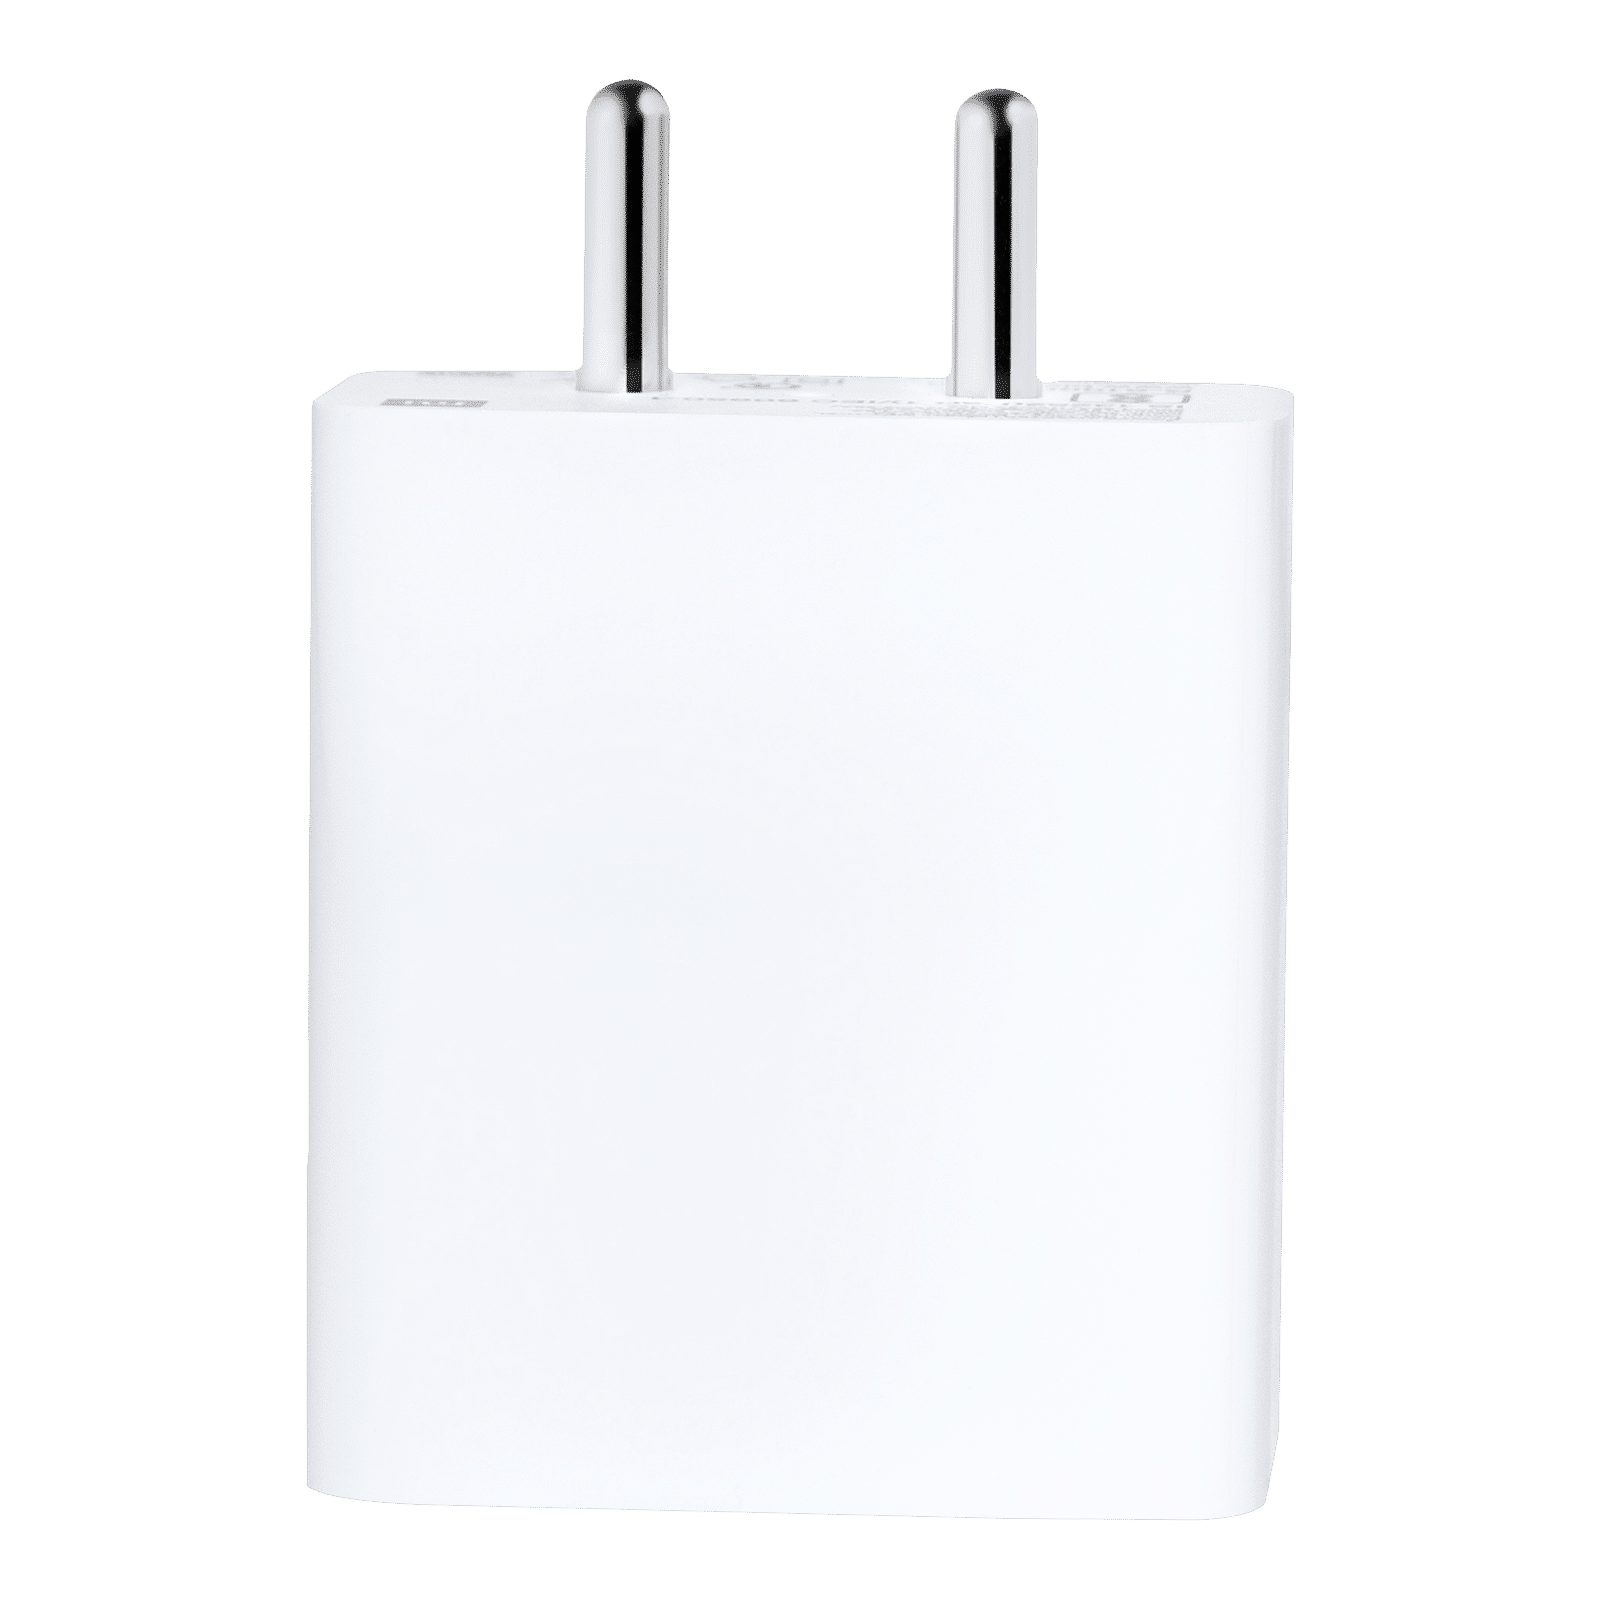 Mi Qualcomm 3.0 Type-C Fast Charging Travel Charger - White